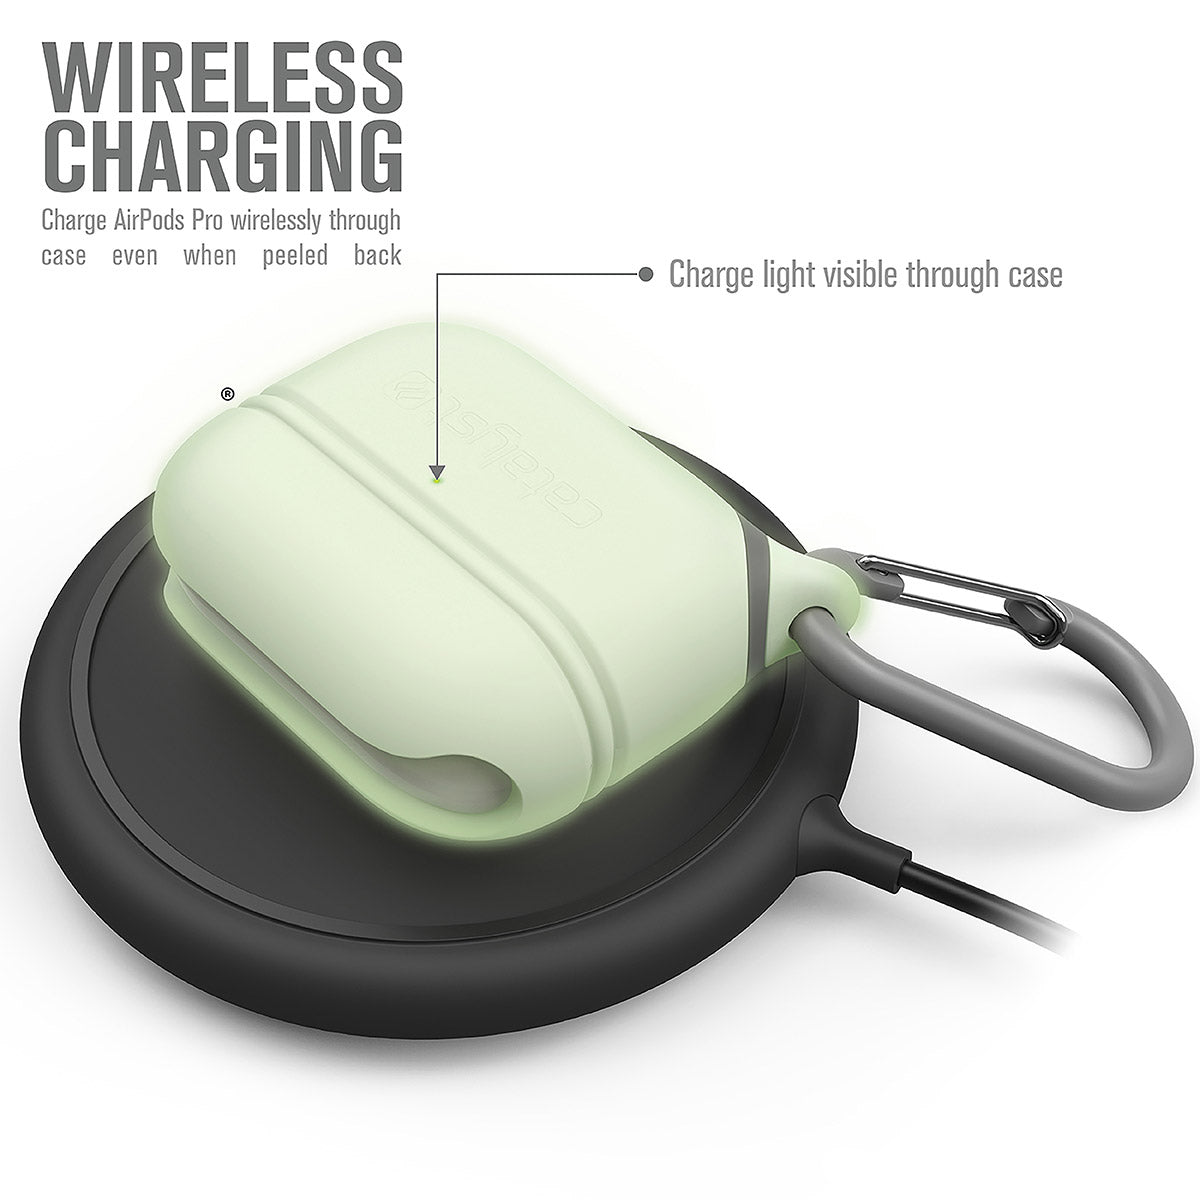 CATAPLAPDPROGITD | catalyst airpods pro gen 2 1 waterproof case carabiner special edition glow in the dark on top of a wireless charger text reads wireless charging charge airpods pro wirelessly through case even when peeled back charge light visible through case